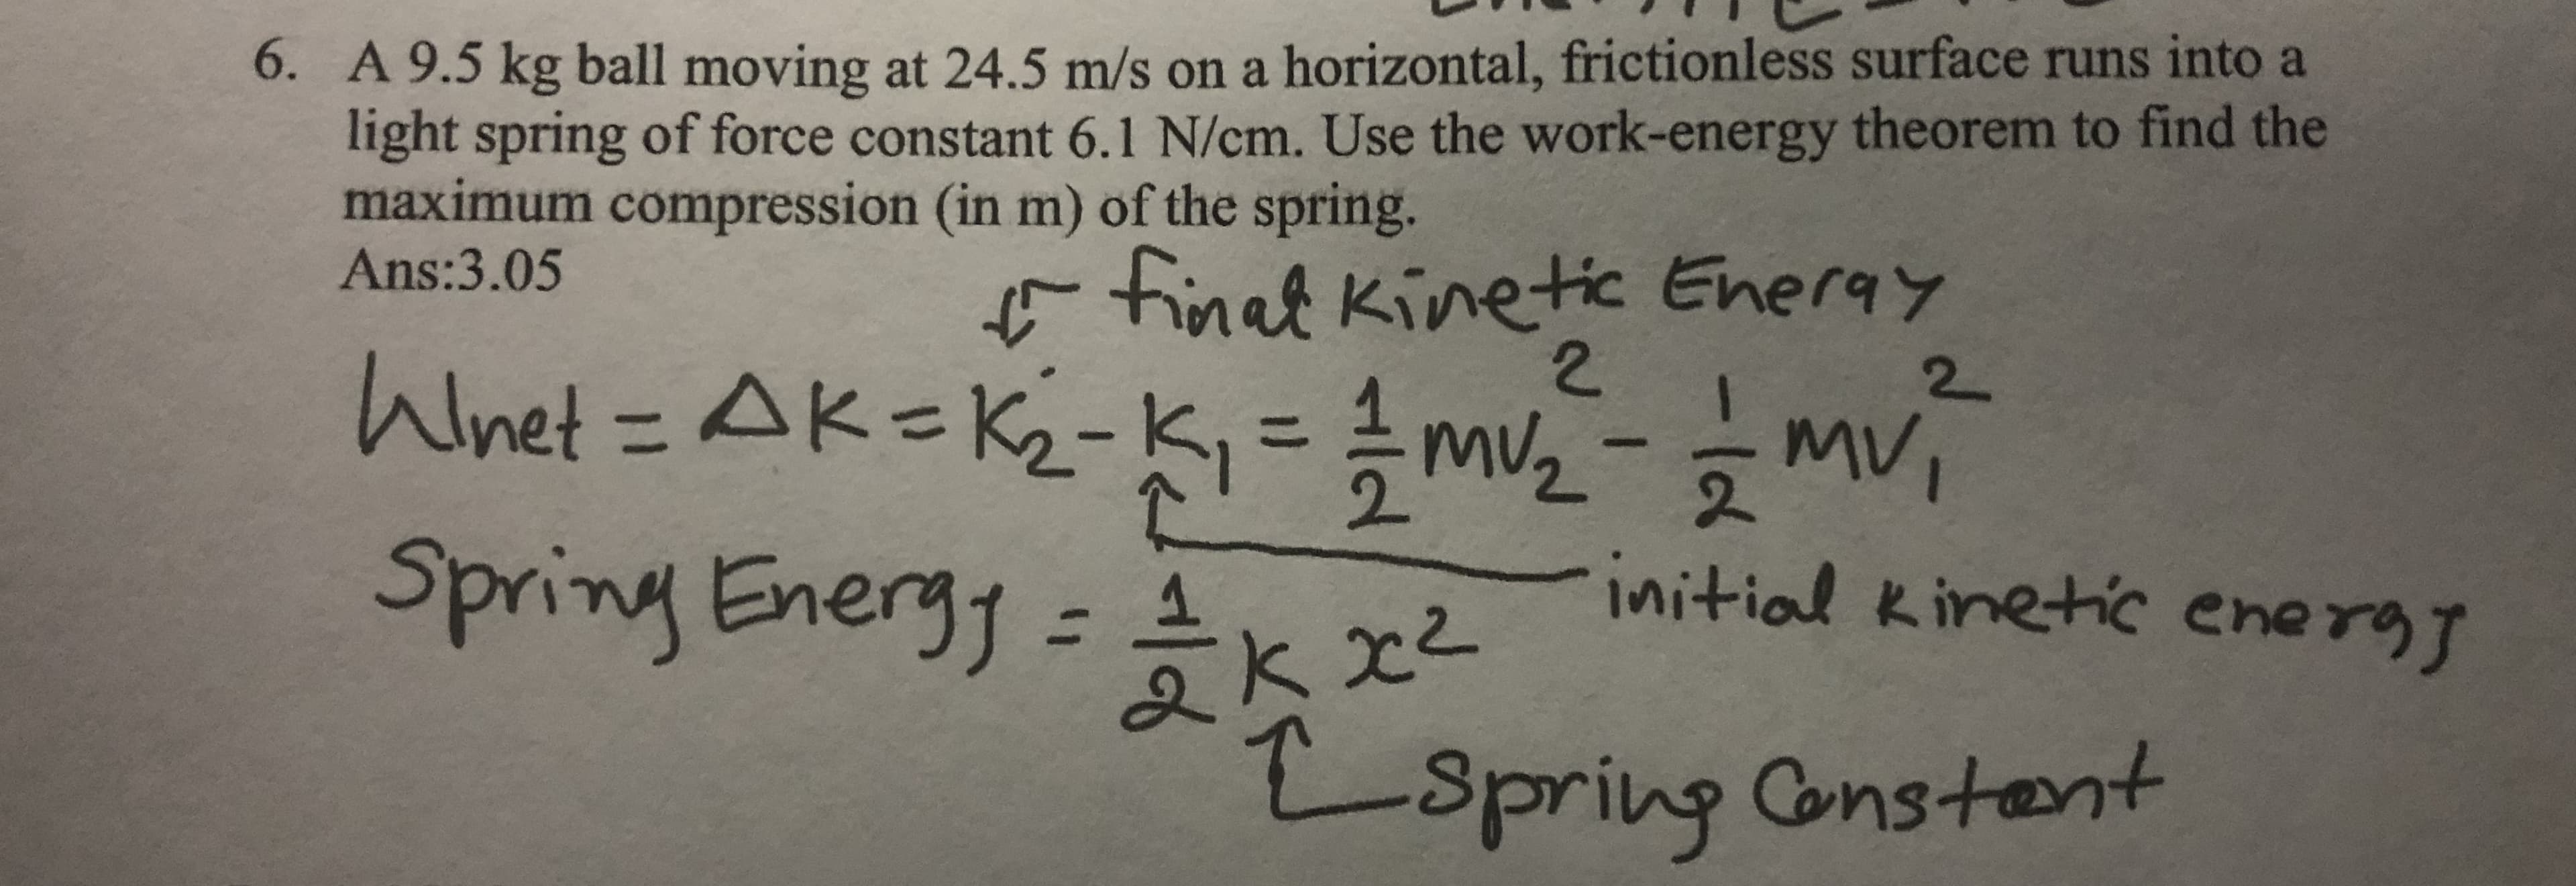 6. A 9.5 kg ball moving at 24.5 m/s on a horizontal, frictionless surface runs into a
light spring of force constant 6.1 N/cm. Use the work-energy theorem to find the
maximum compression (in m) of the spring.
Ans:3.05
Finat Kinetic Eneray
2.
Wnet%3DAK=K2-K
2
%3D
Spring Energy =k x
initial kinetic energy
%3D
Espring
Constent
